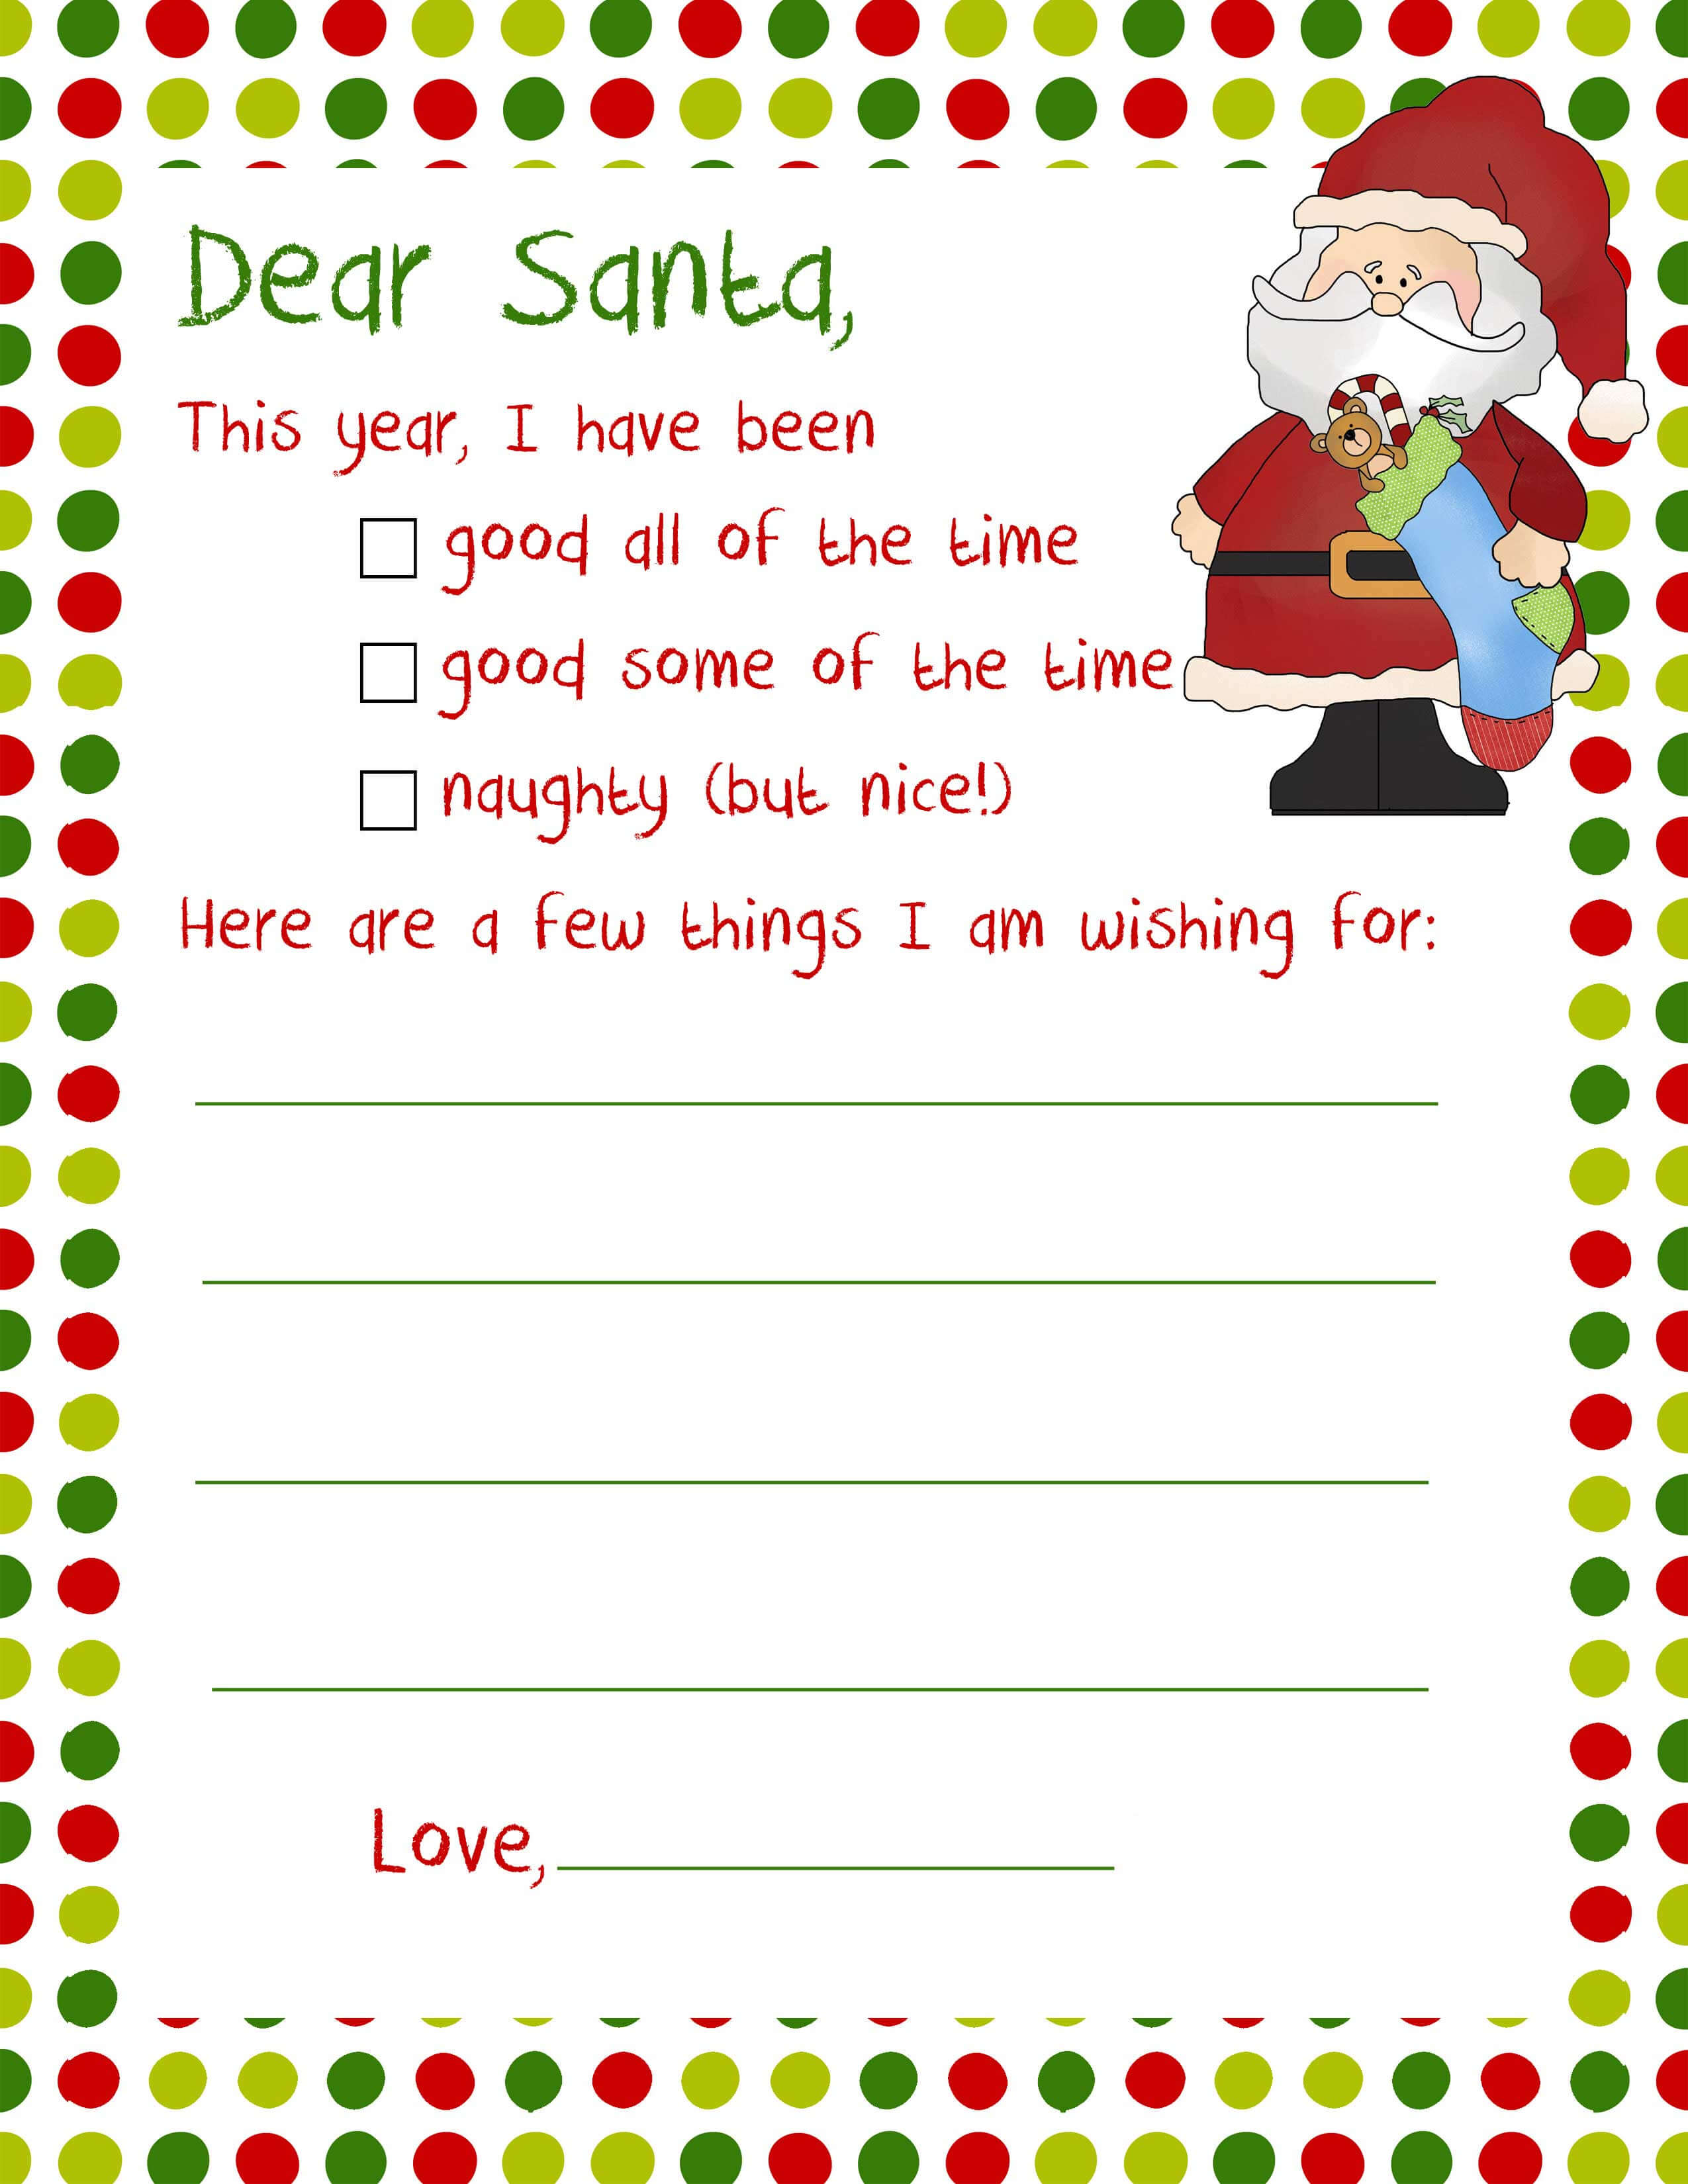 034 Santa Letter Letters From Template Archaicawful Ideas Pertaining To Letter From Santa Template Word